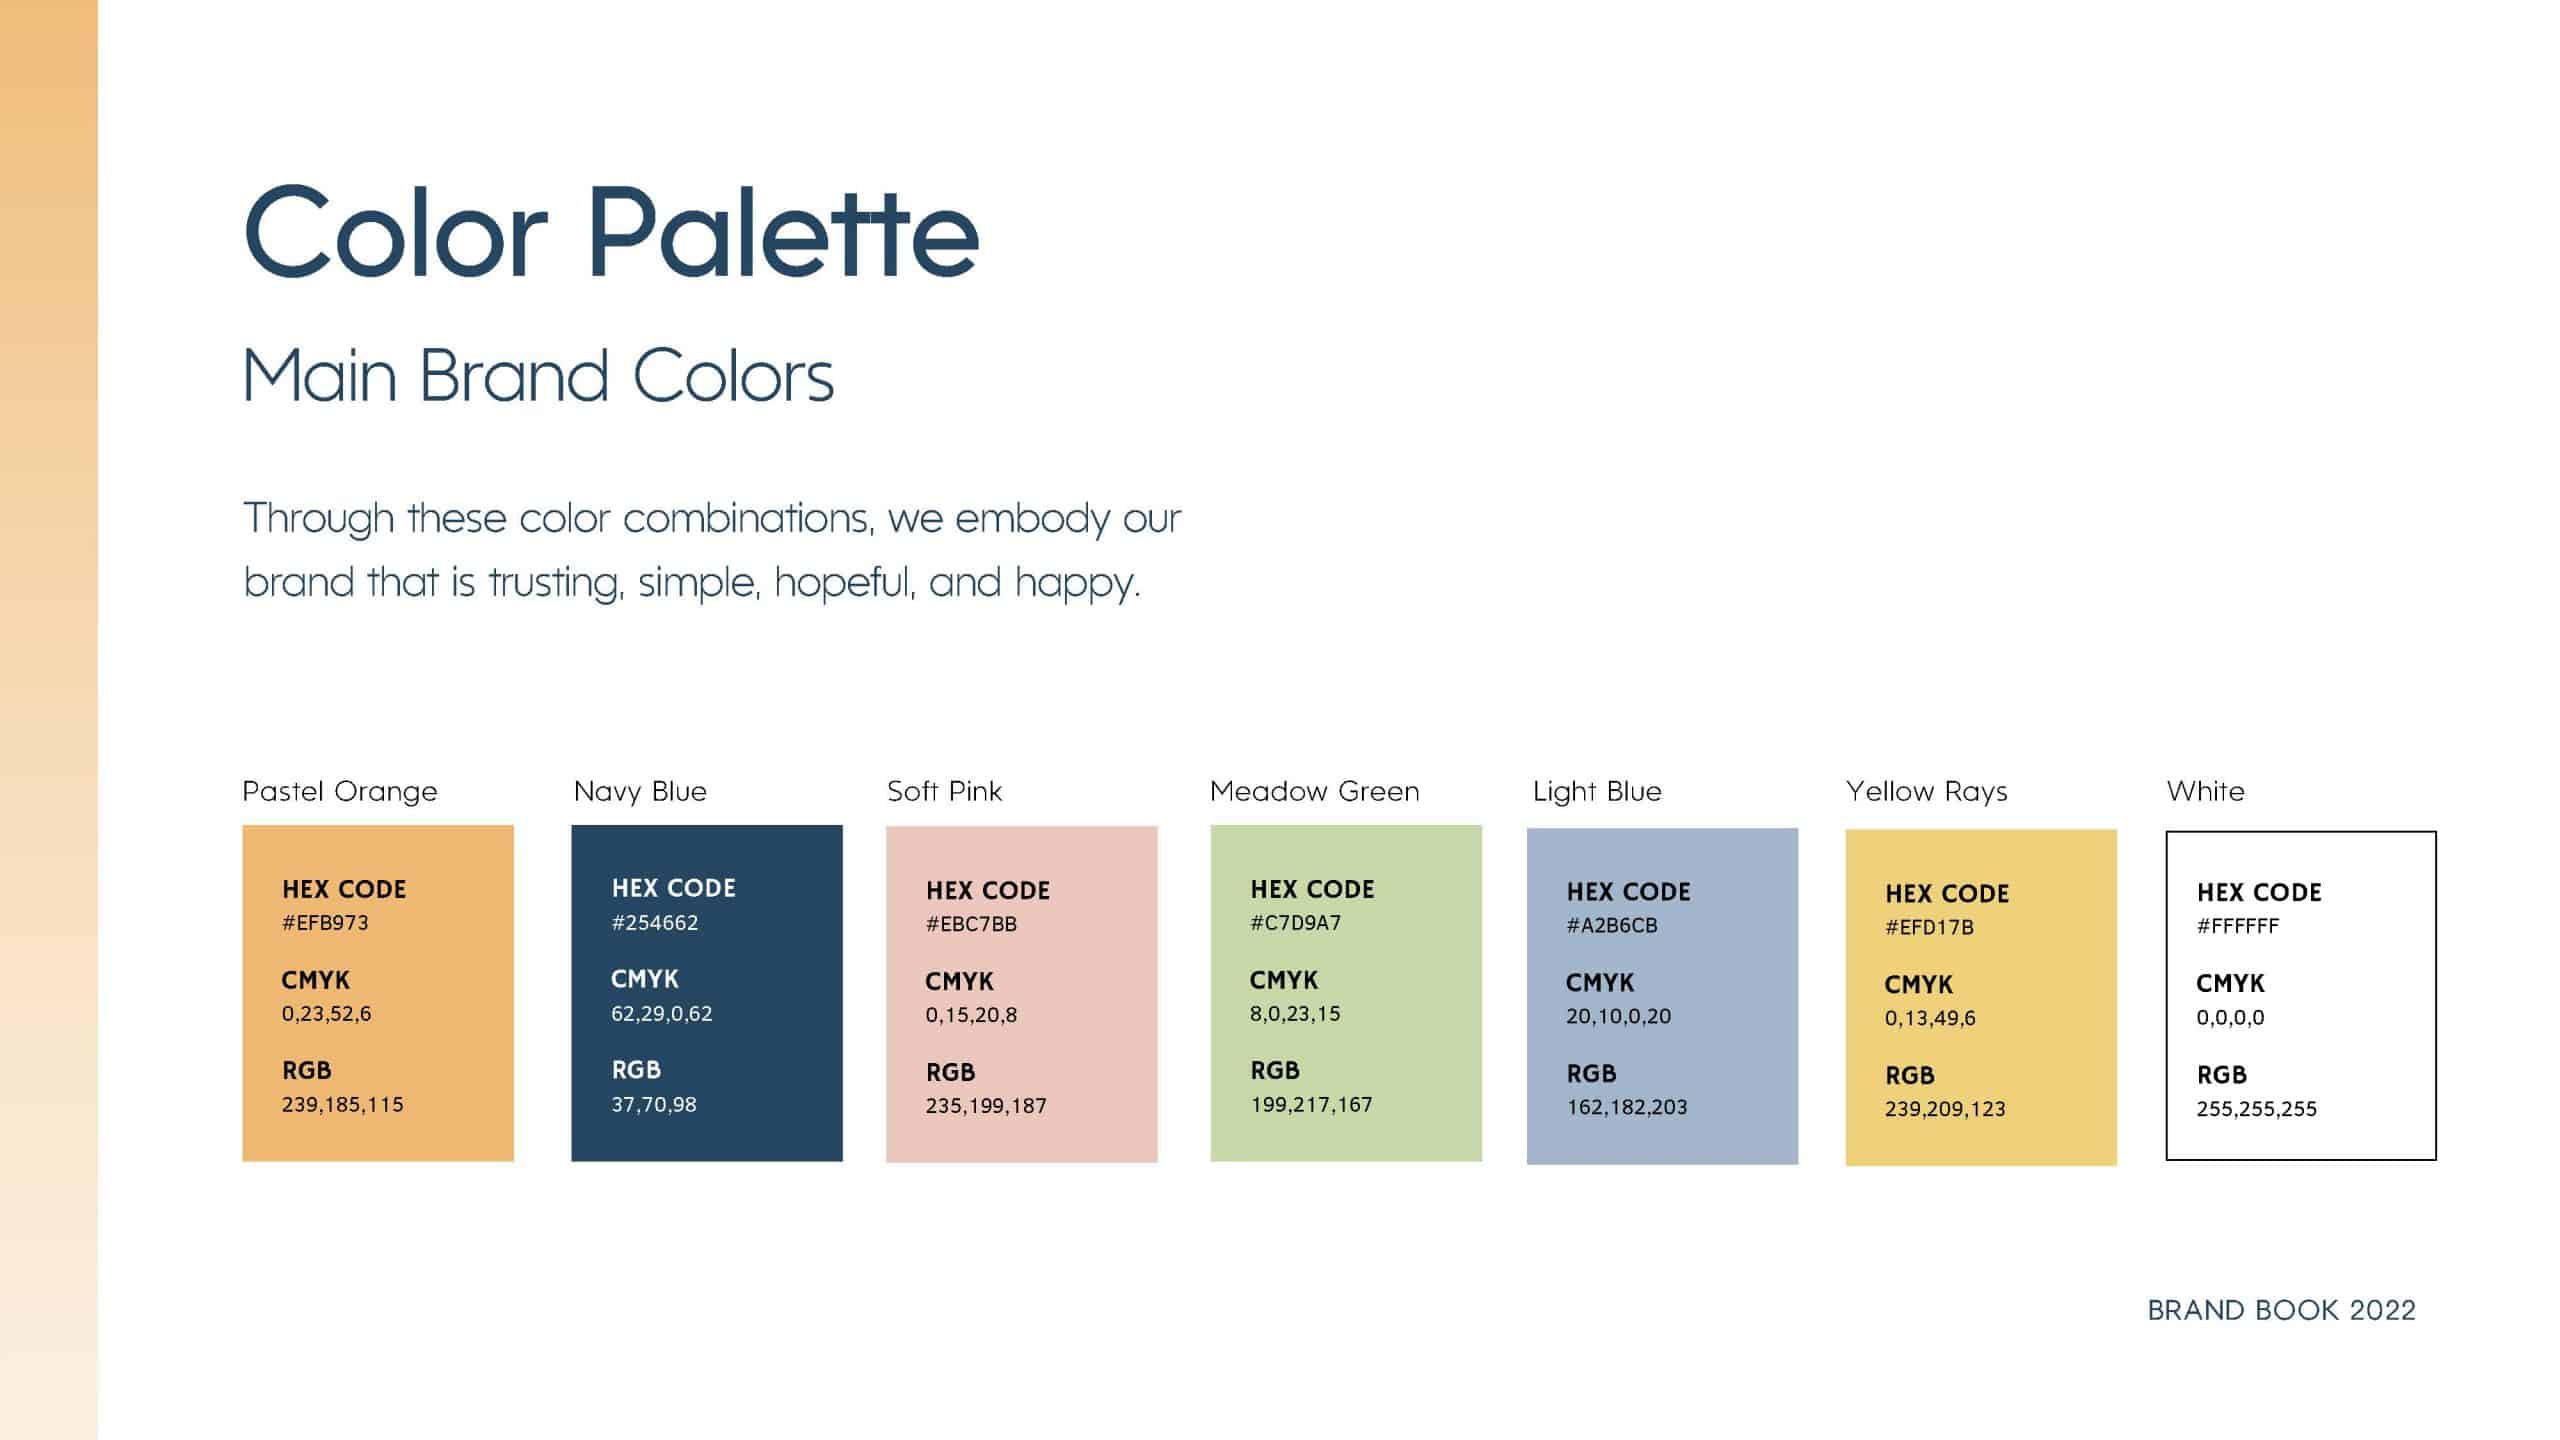 color palette from a brand book deigned for a health and wellness app